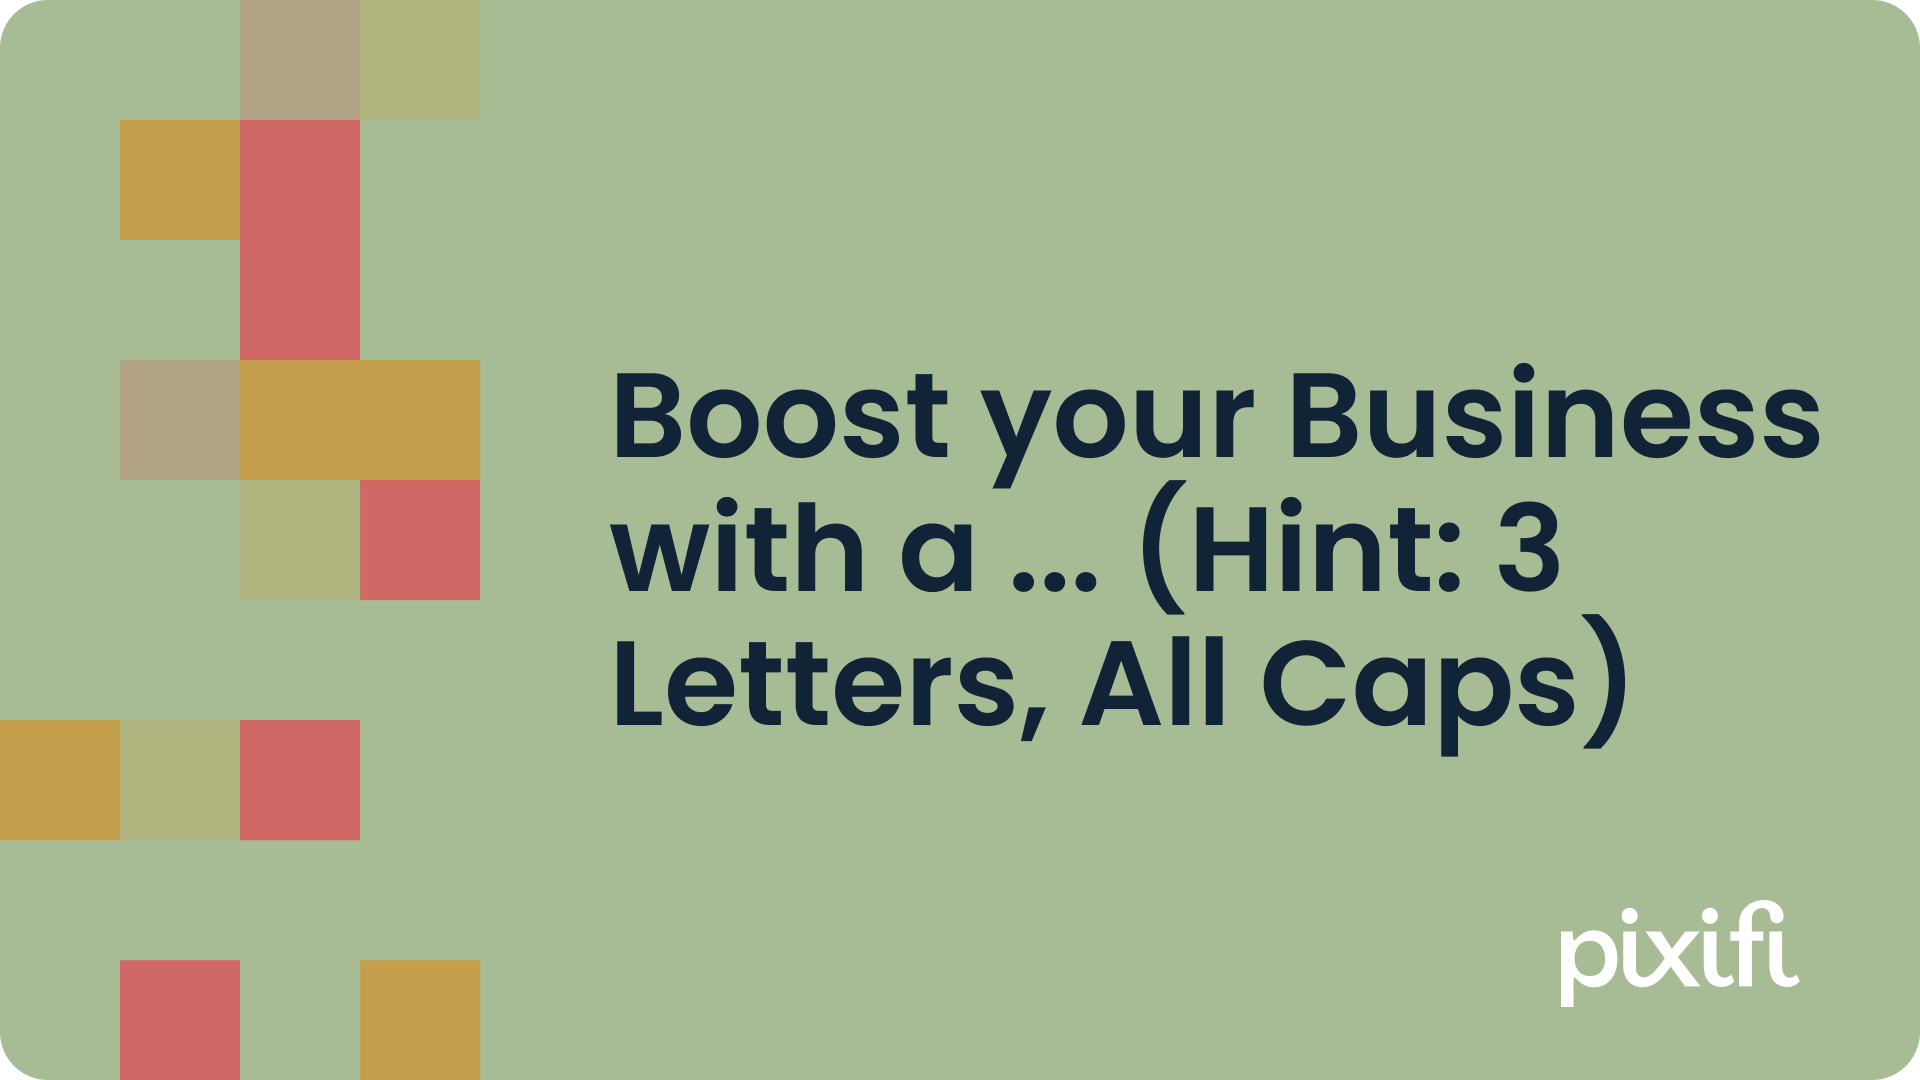 Boost your Business with a ... (Hint: 3 Letters, All Caps)